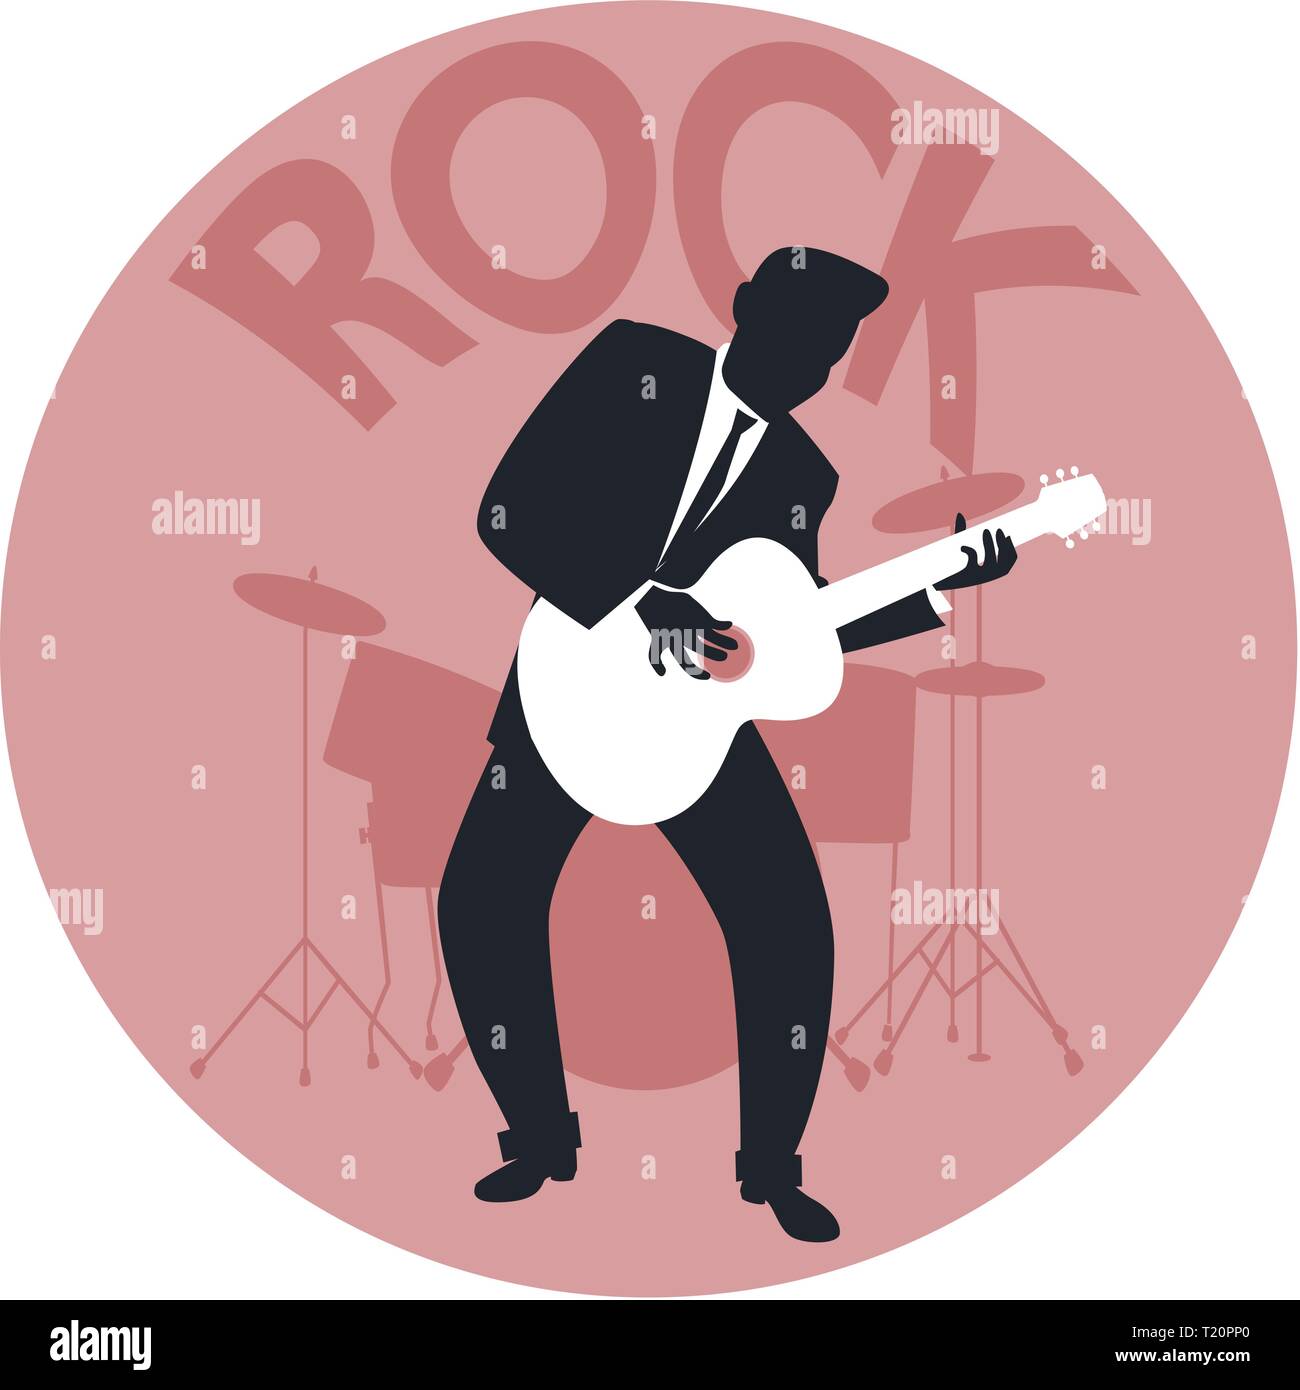 Musical style. Rock. Silhouette of guitar player and drums in the background Stock Vector